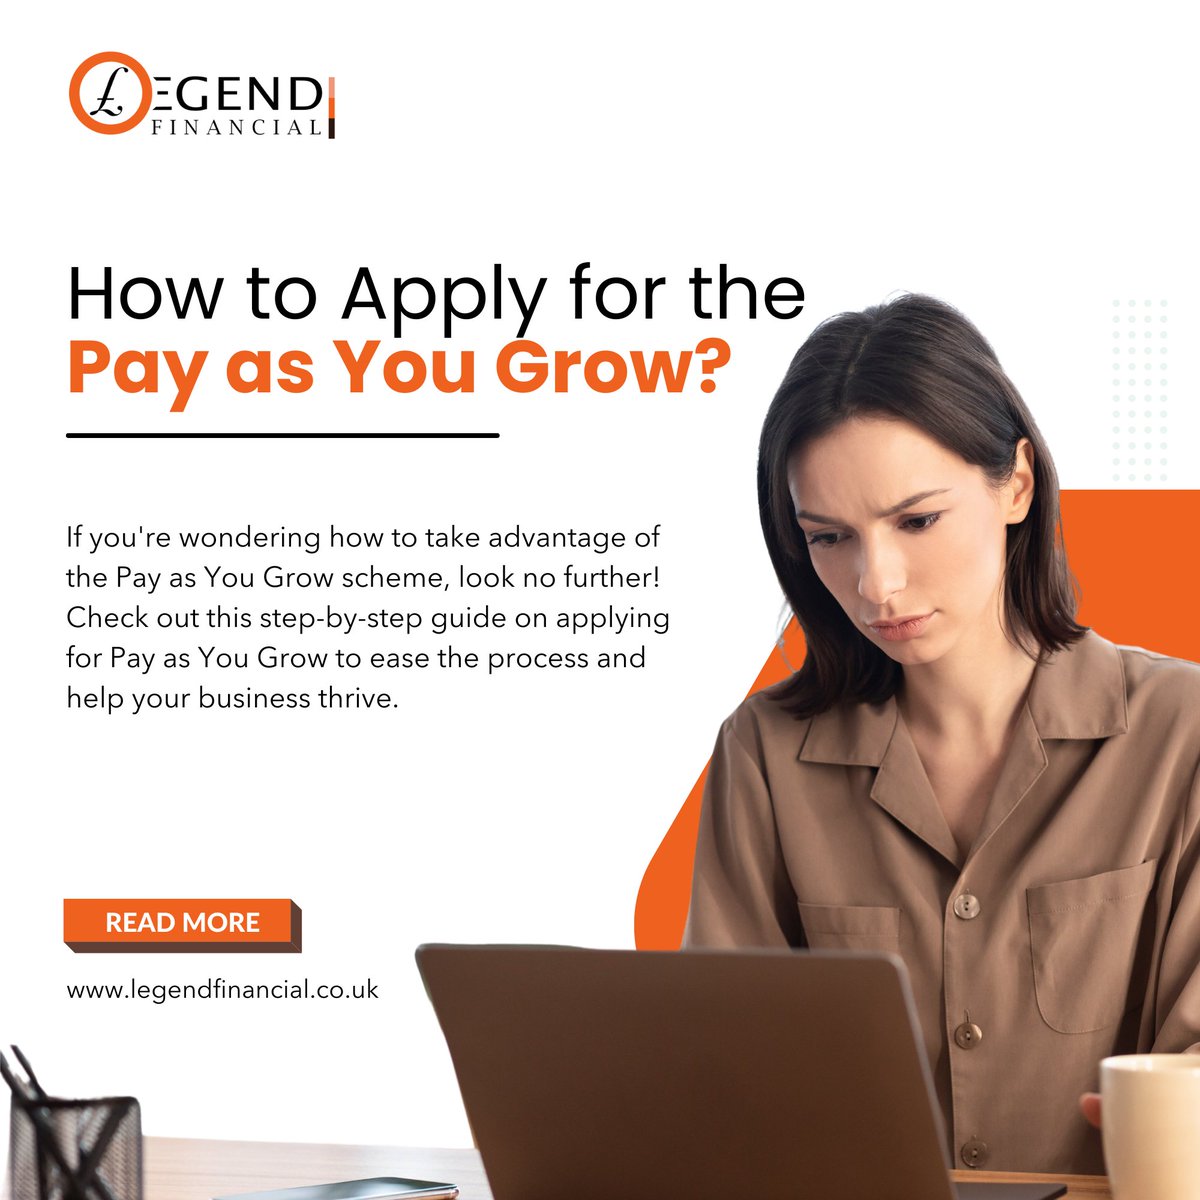 Discover how to apply for Pay as You Grow! Check out this informative article about the Bounce Back Loan extension. Get the details you need to make informed decisions. 💡

Read here: legendfinancial.co.uk/general/bounce…

Stay ahead with #PayAsYouGrow! #BusinessFinance #BounceBackLoan